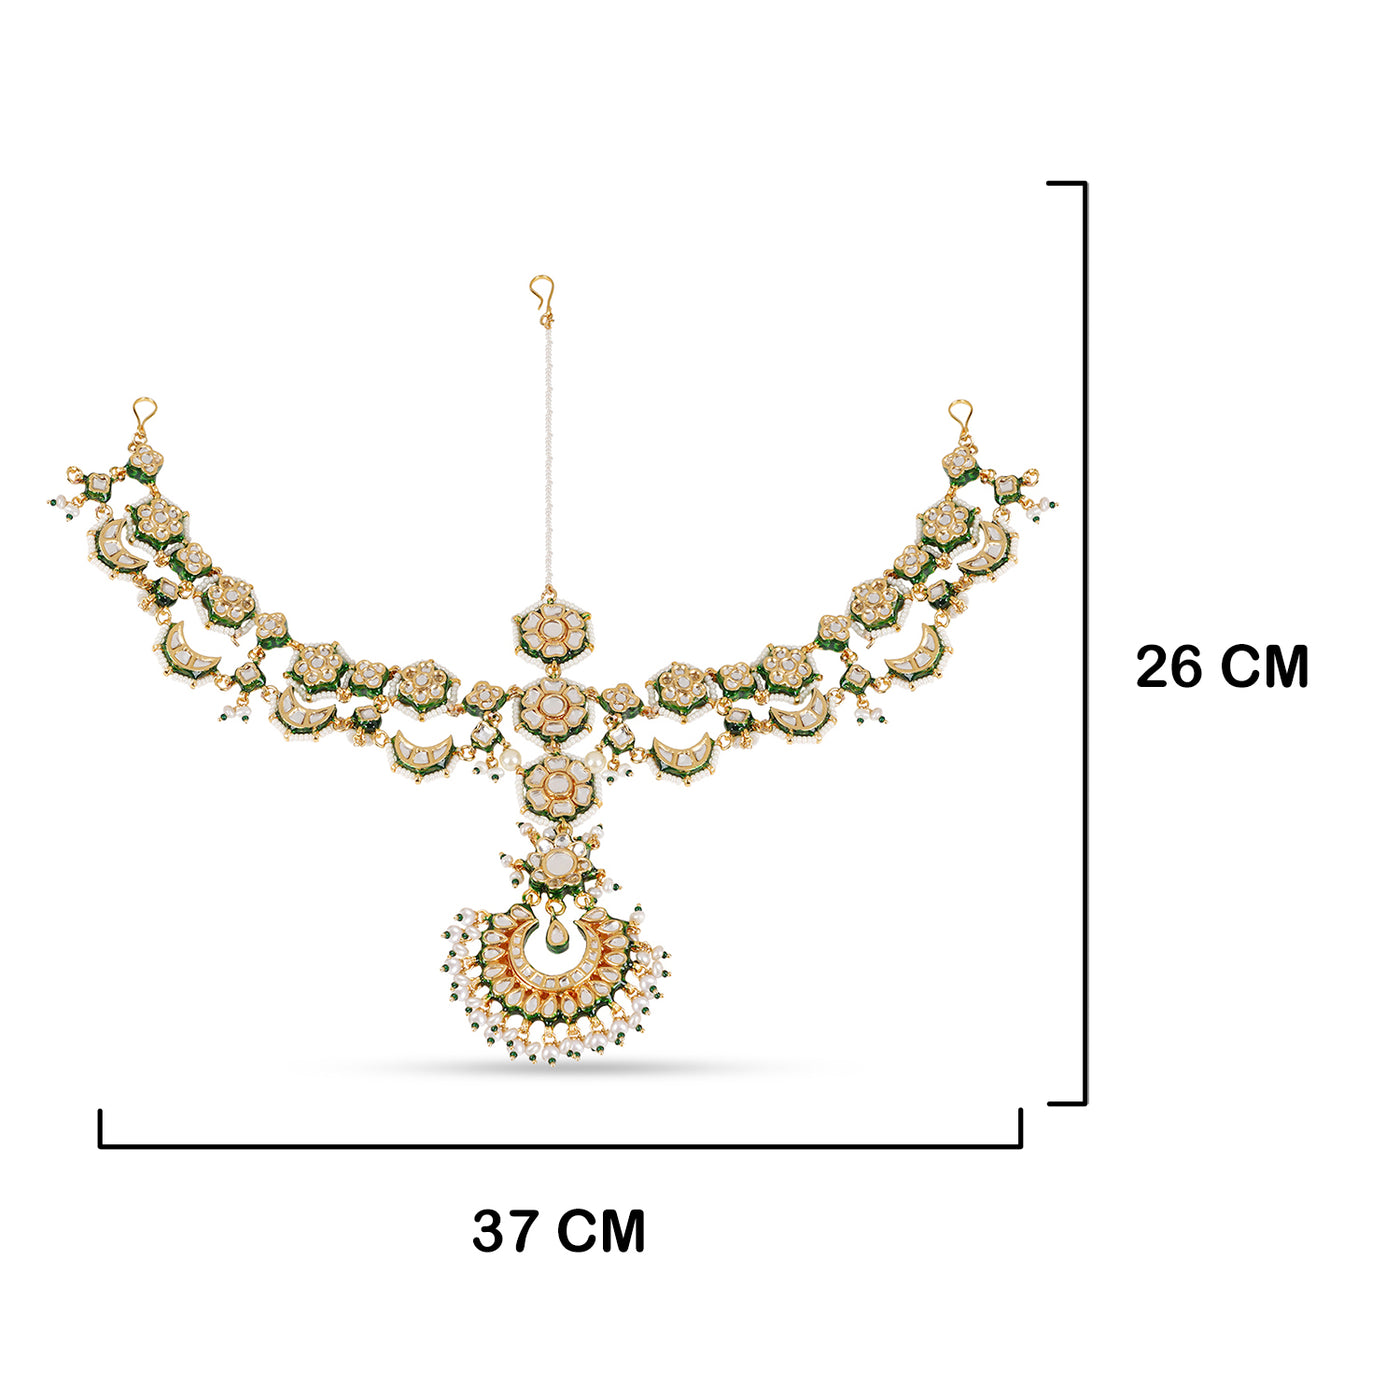 Classic Meenakari Maathapatti with measurements in cm. 37cm by 26cm.